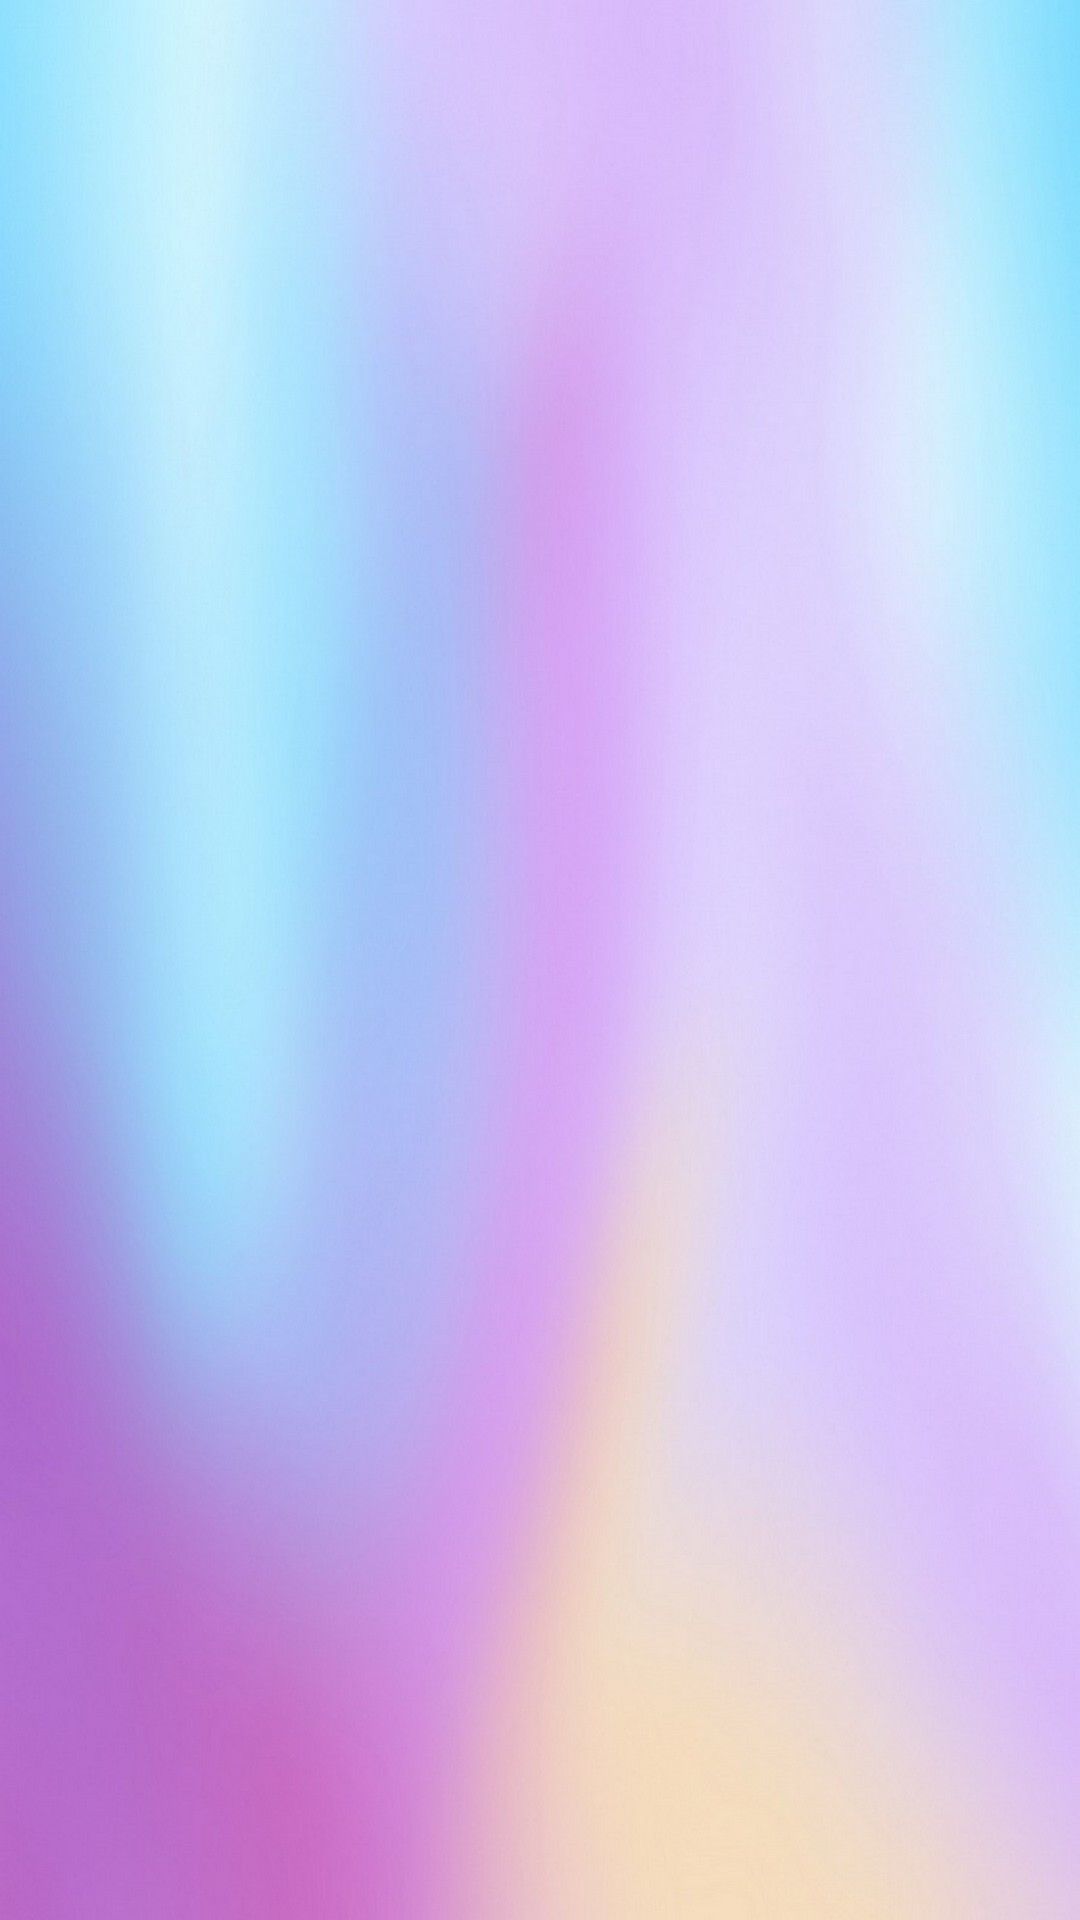 Wallpaper Android Gradient Android Wallpaper